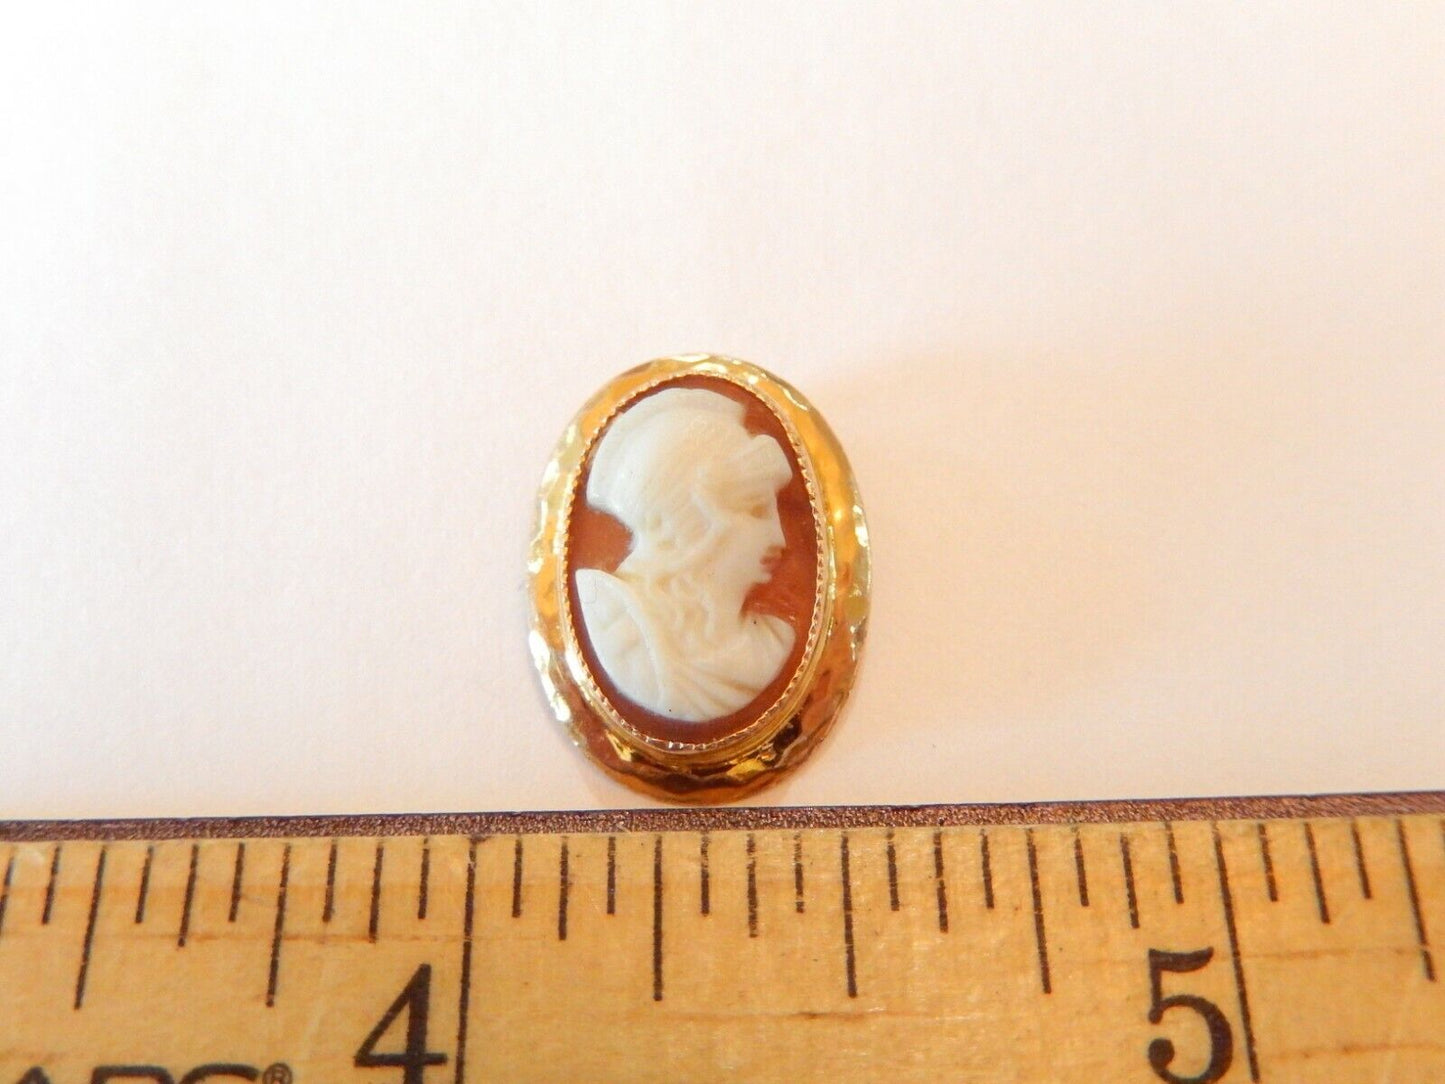 *VINTAGE* 14k Yellow Gold Carved Shell Cameo Pendant Woman Bust 18mm x 14mm